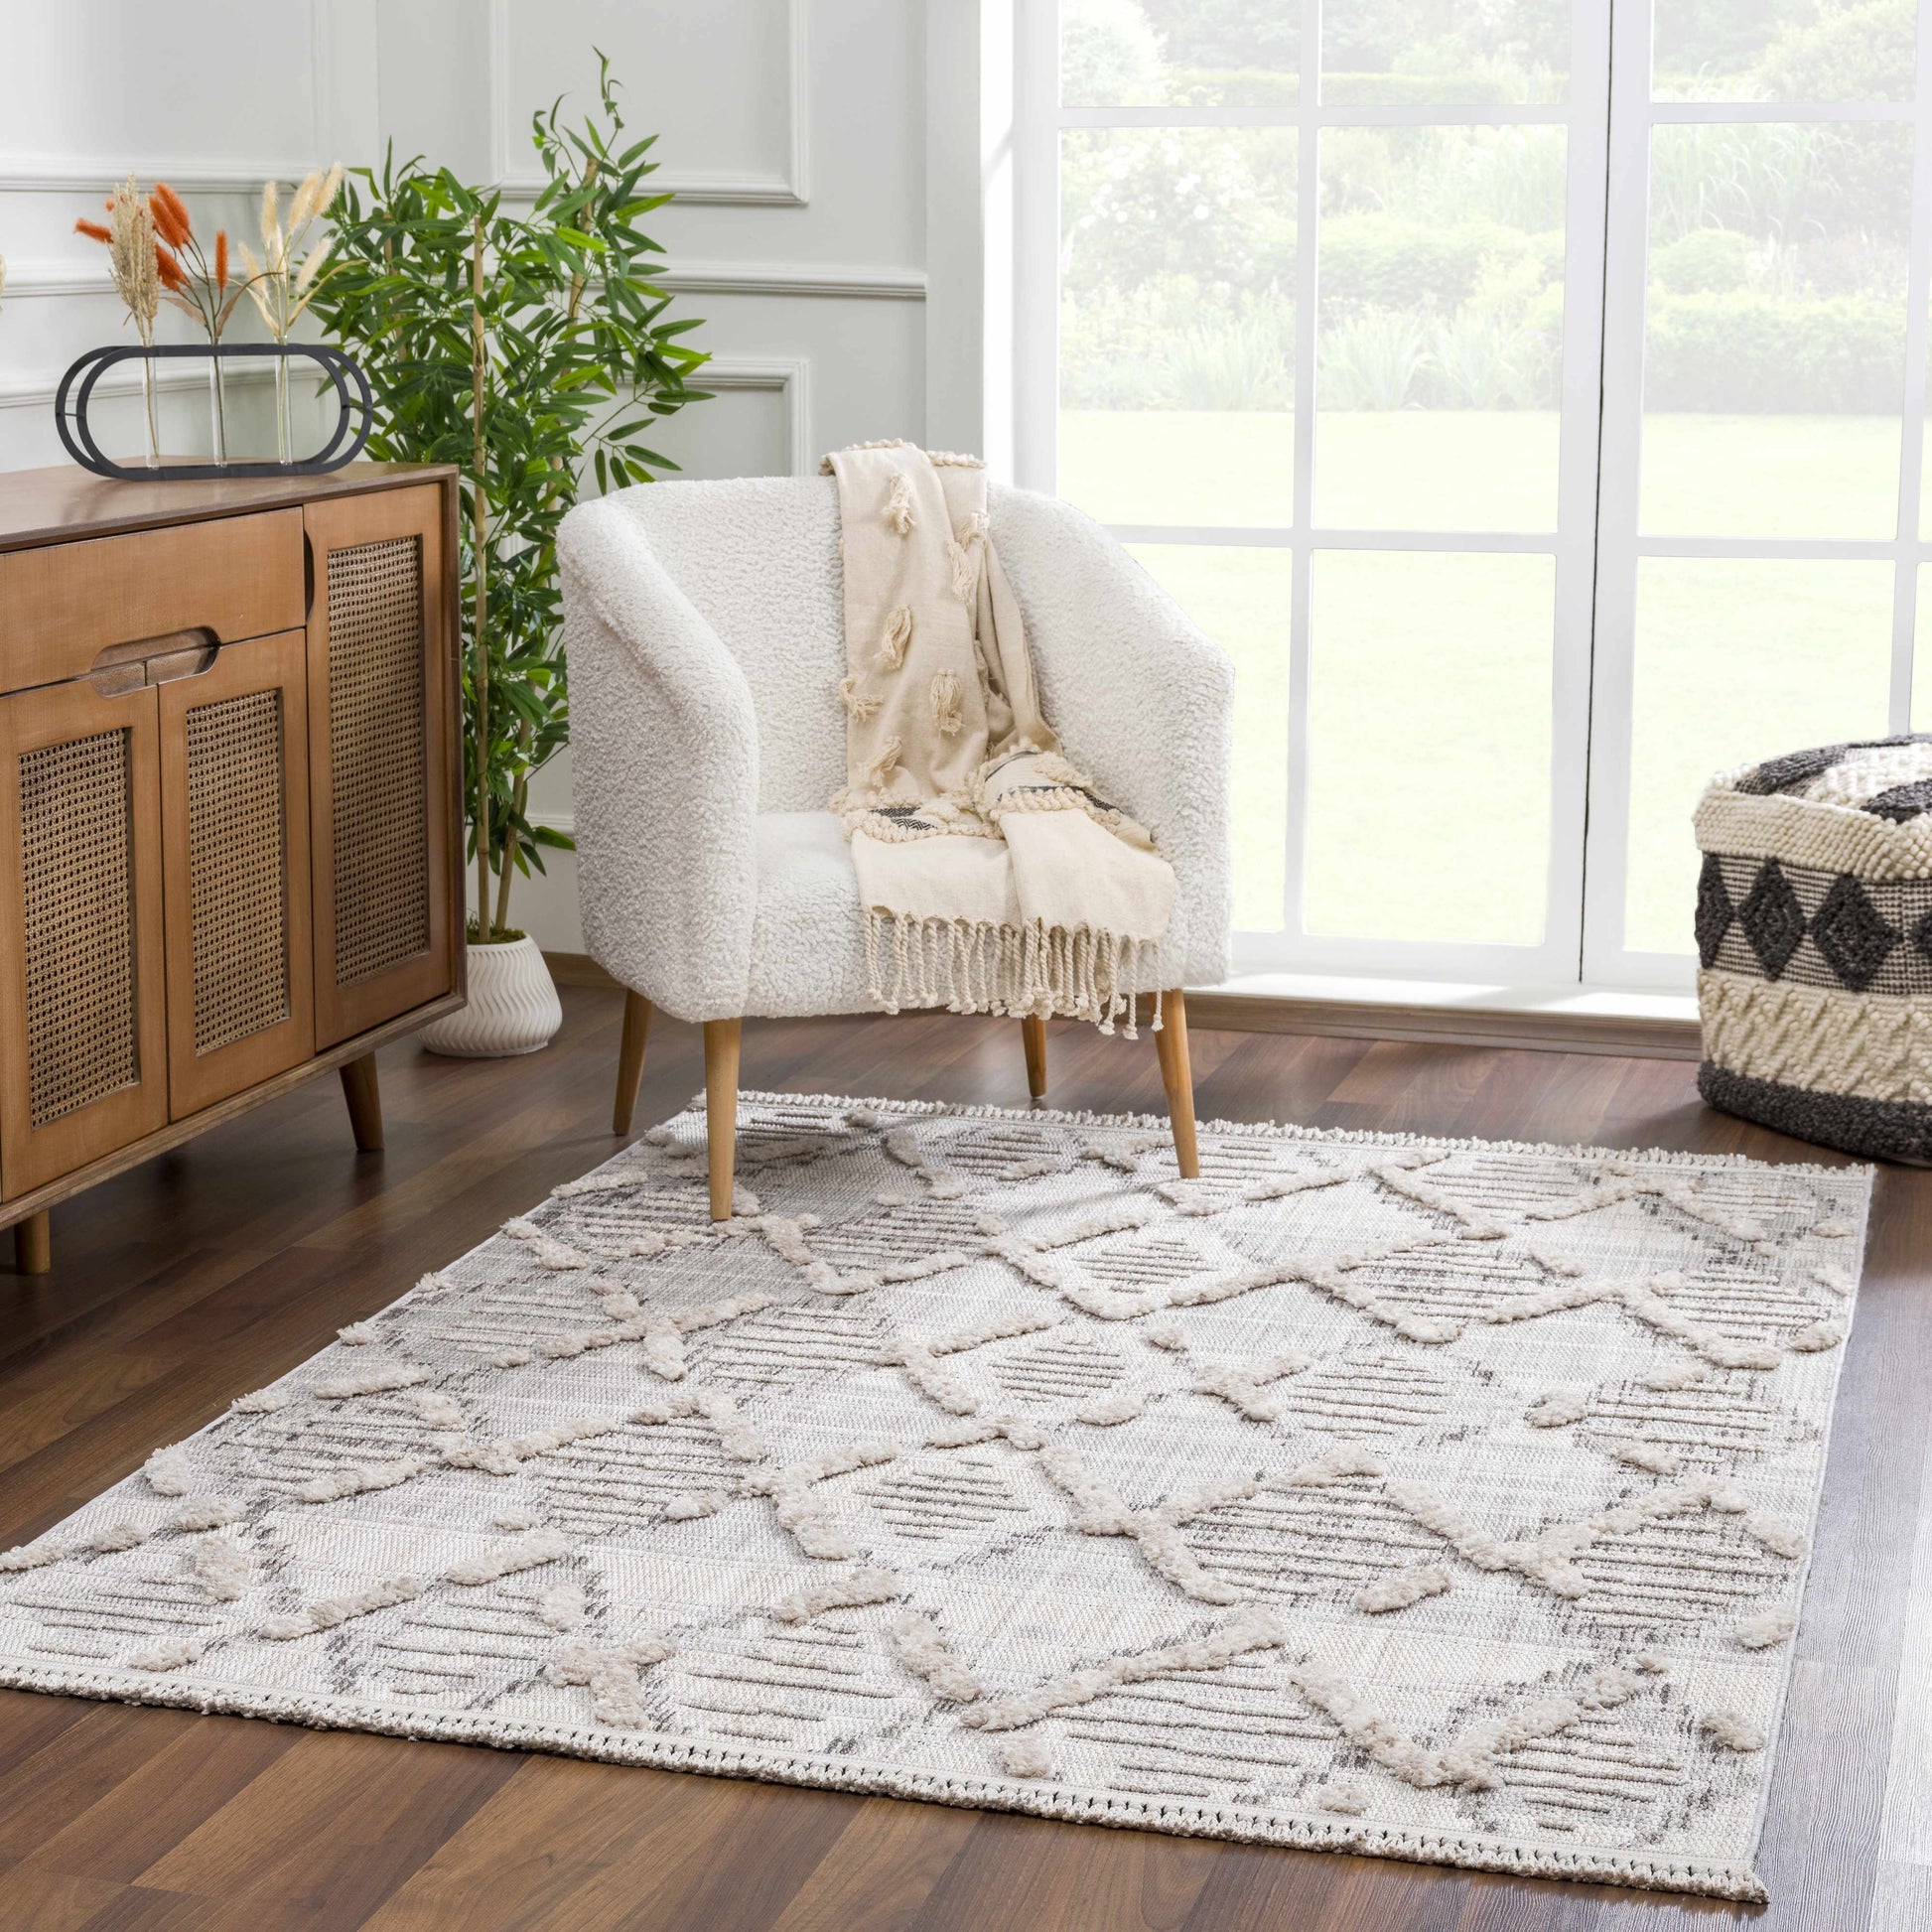 Boutique Rugs Rugs Bogtong Area Rug